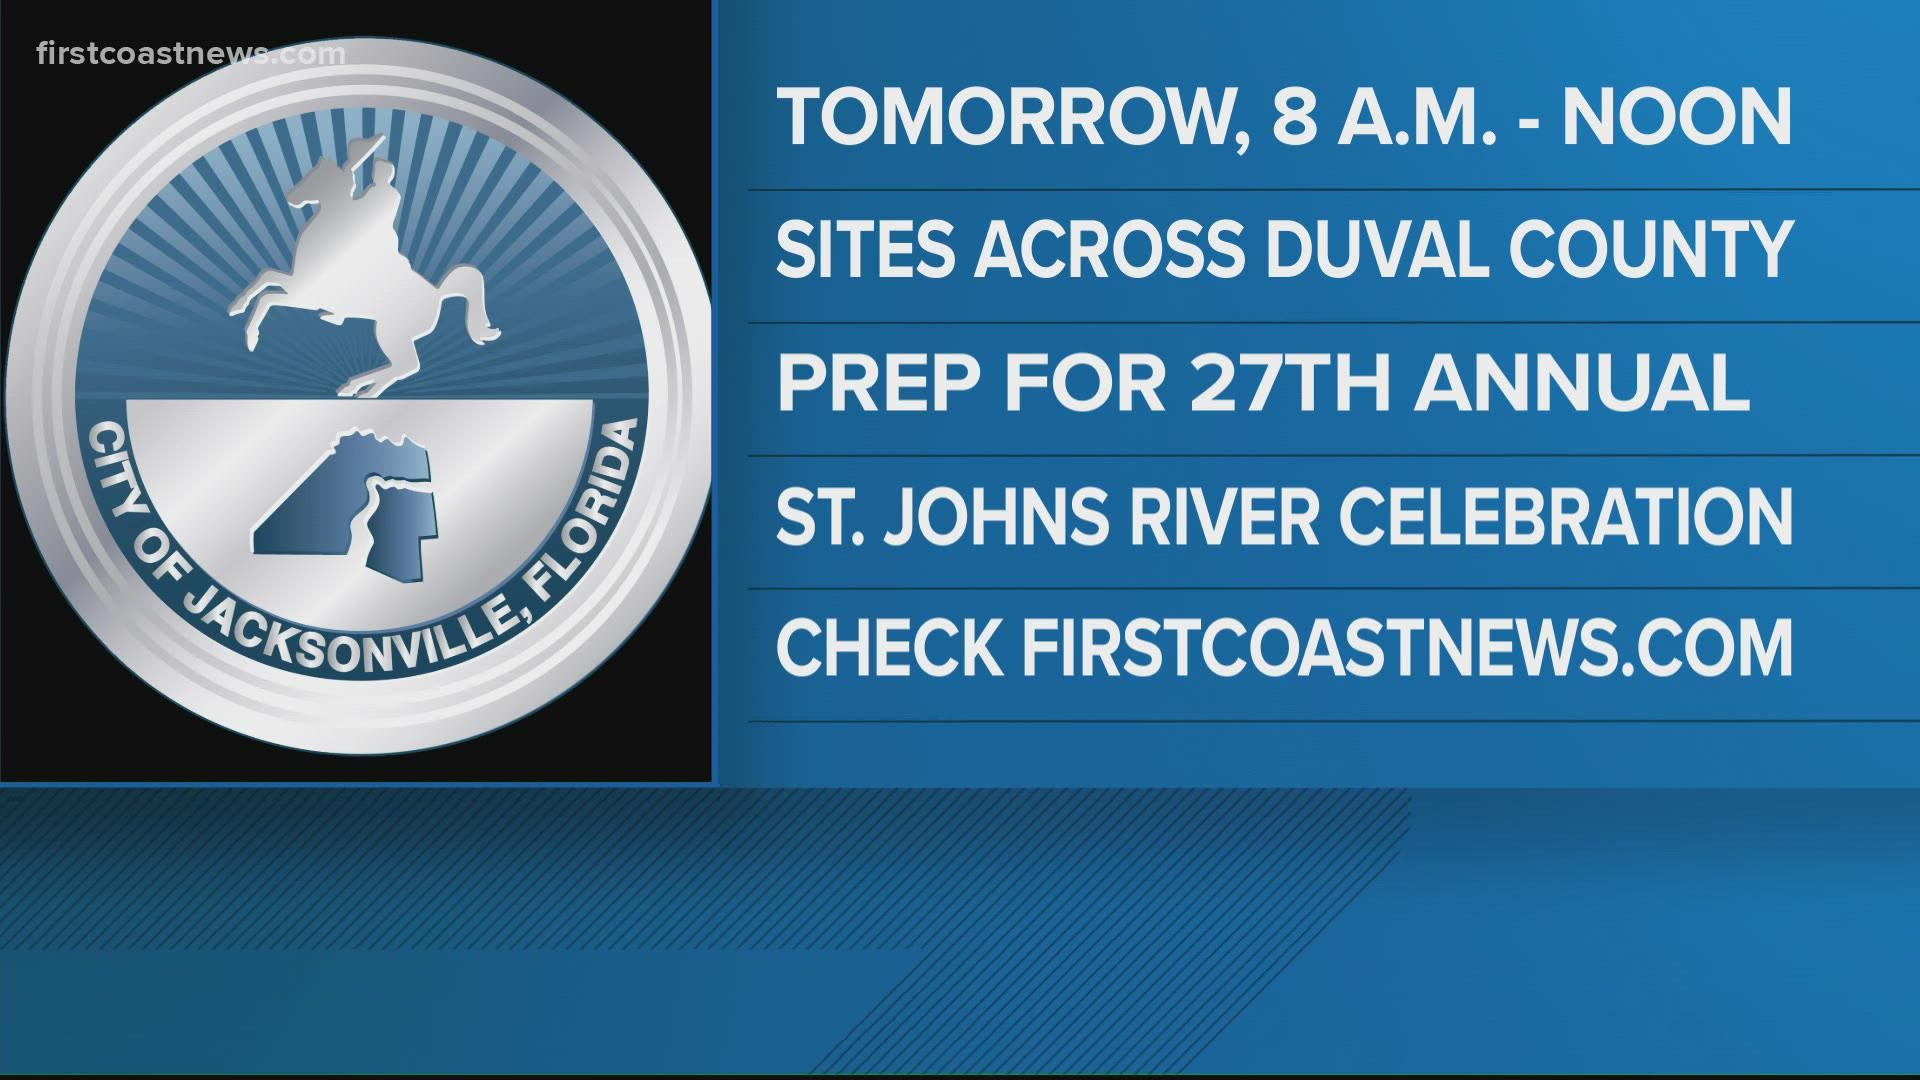 The 27th annual St. Johns River Celebration will take place on Saturday, March 19 from 8 a.m. until noon, depending on the clean up site.